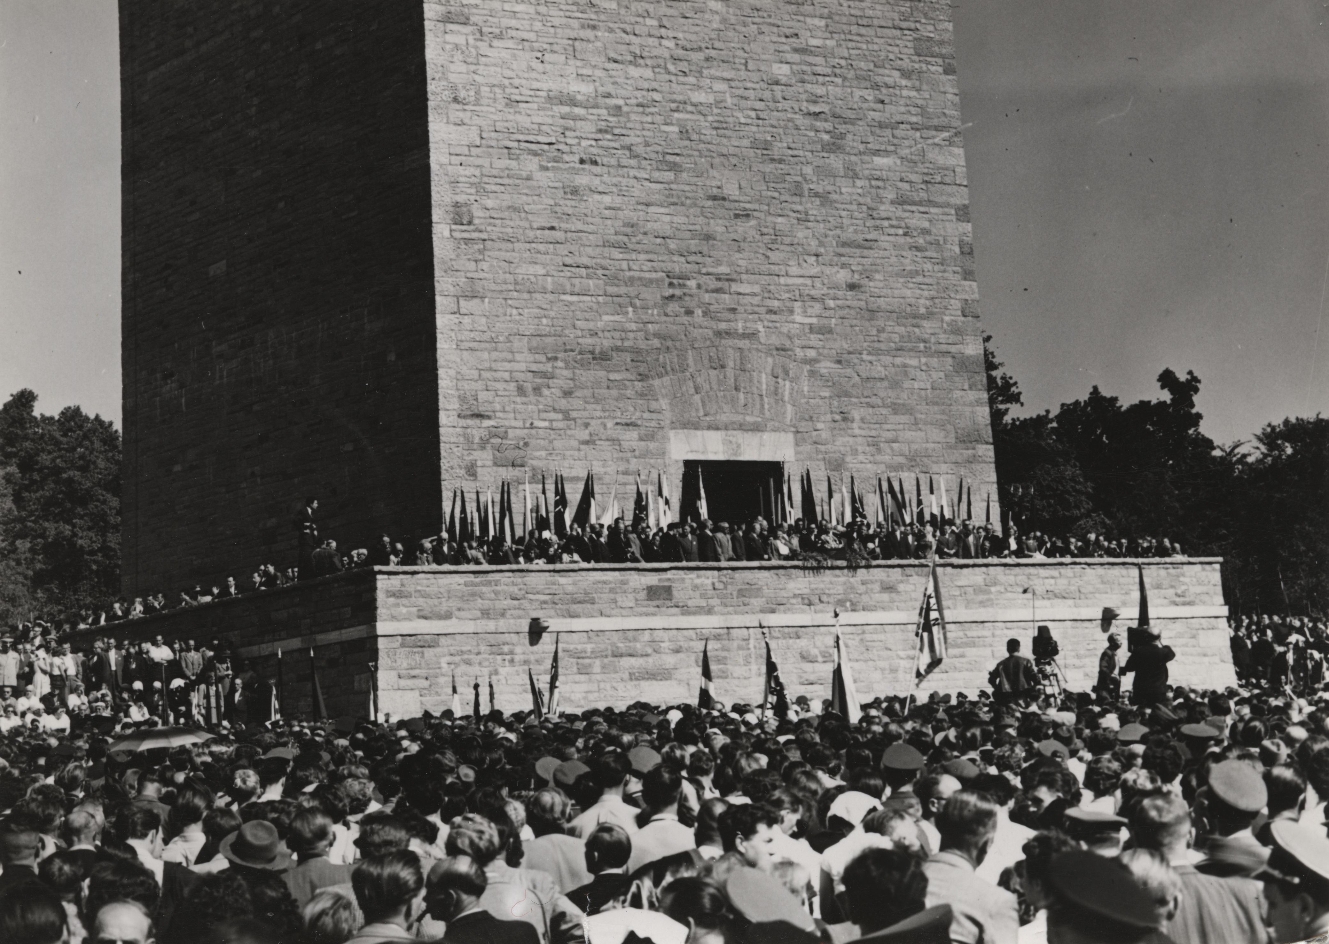 A large crowd of people with isolated flags standing in front of the Tower of Liberty and to another crowd with higher density of flags at the entrance of the Bell Tower.